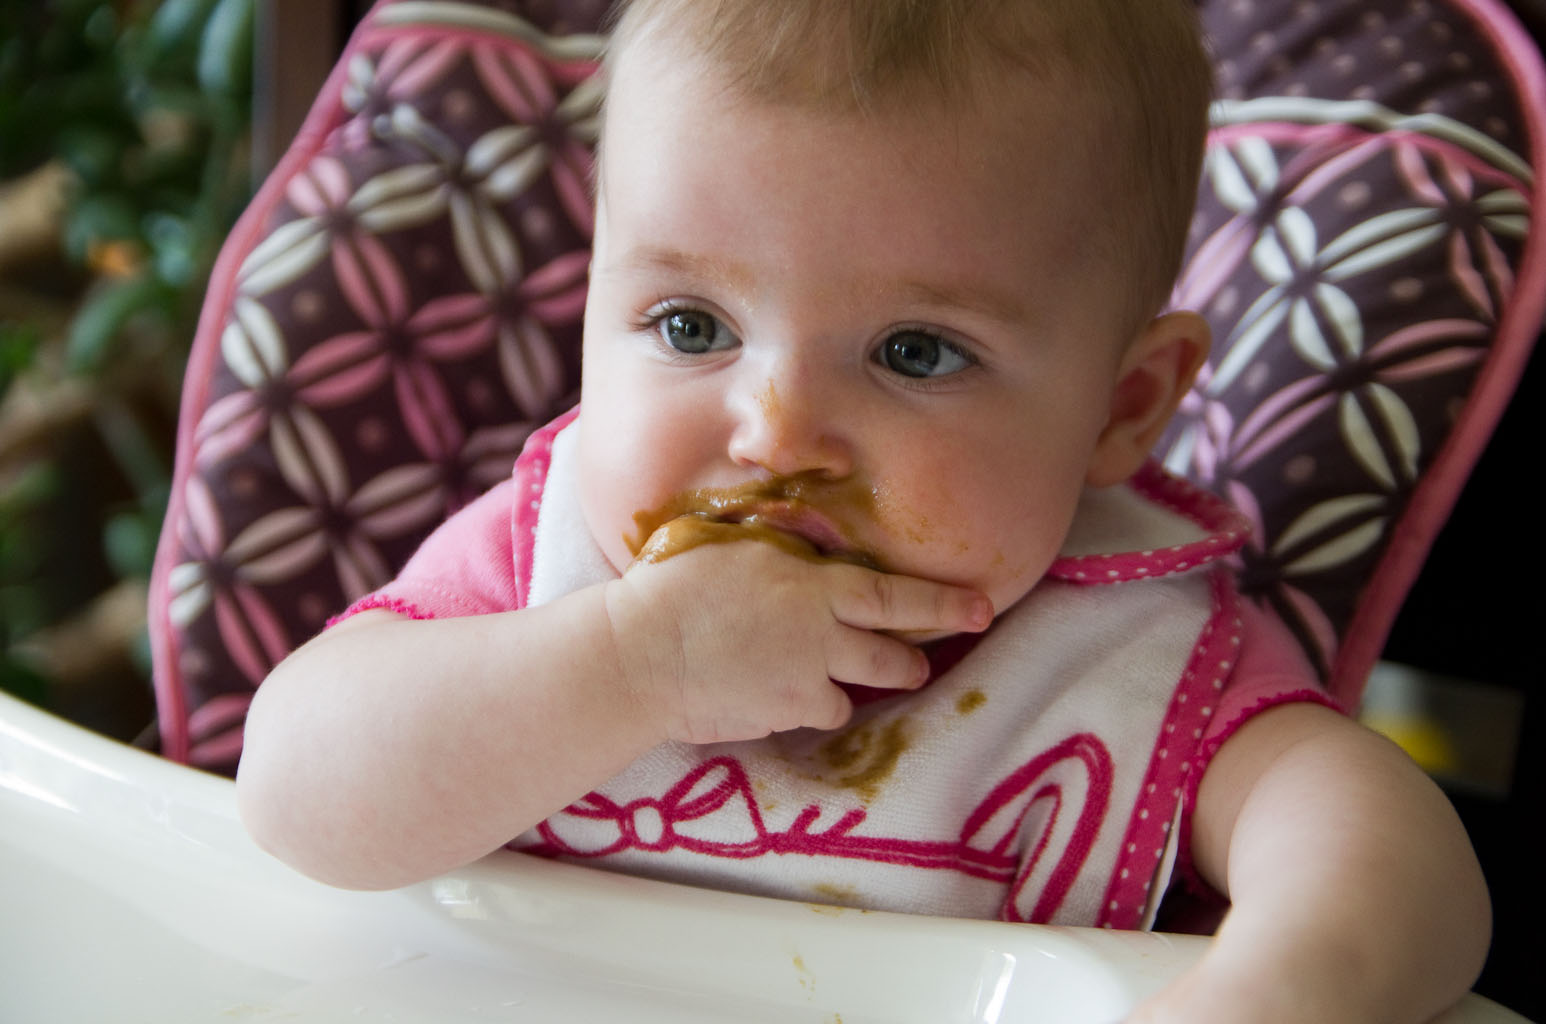 Photo of Baby A tasting solid food for the first time by Elizabeth Powis Fulks.